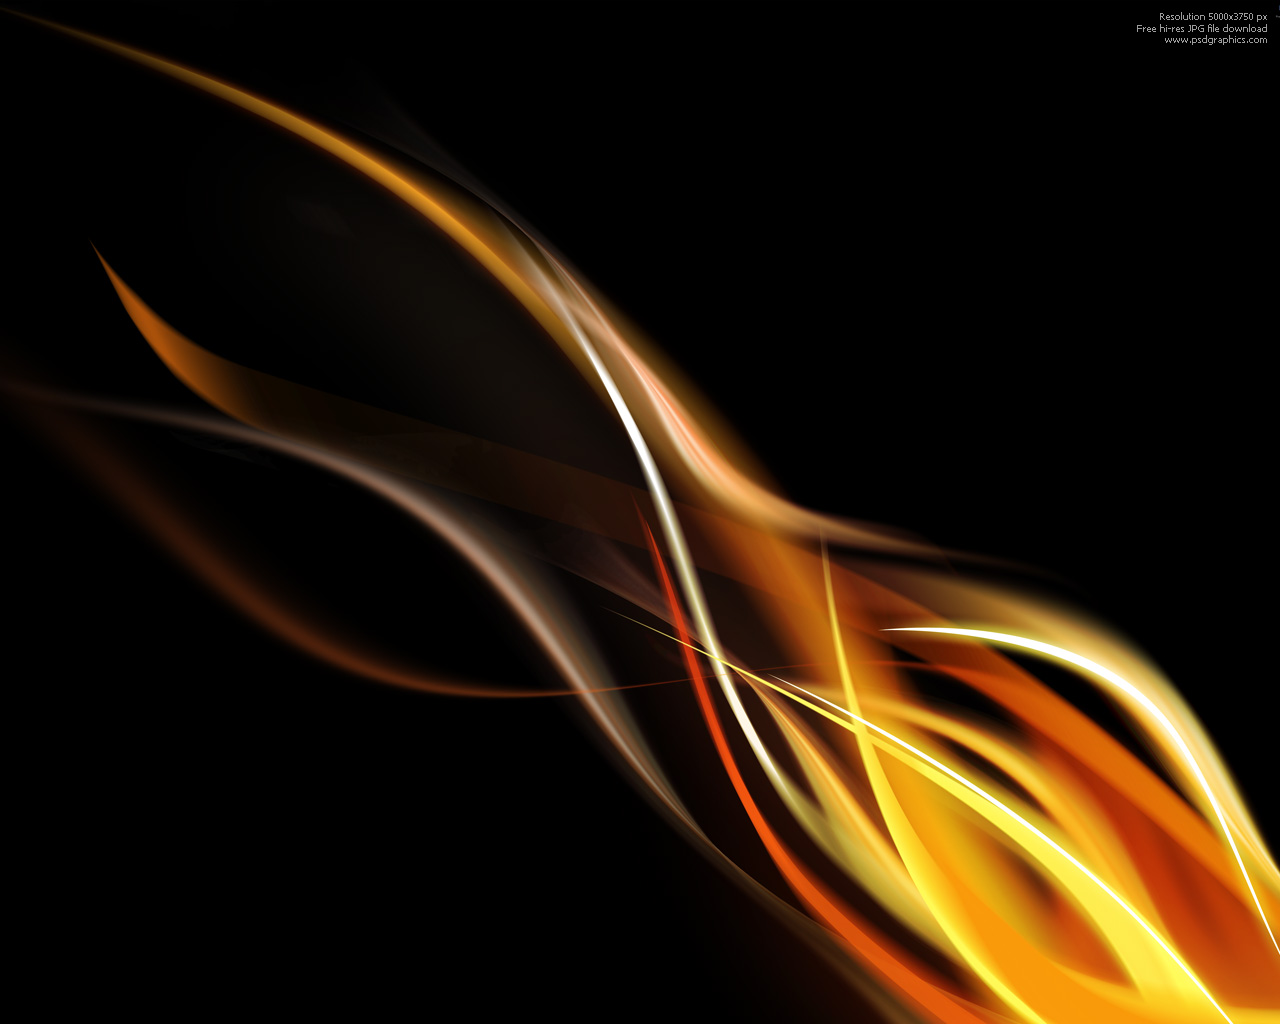 Flame background 12801024 1280x1024